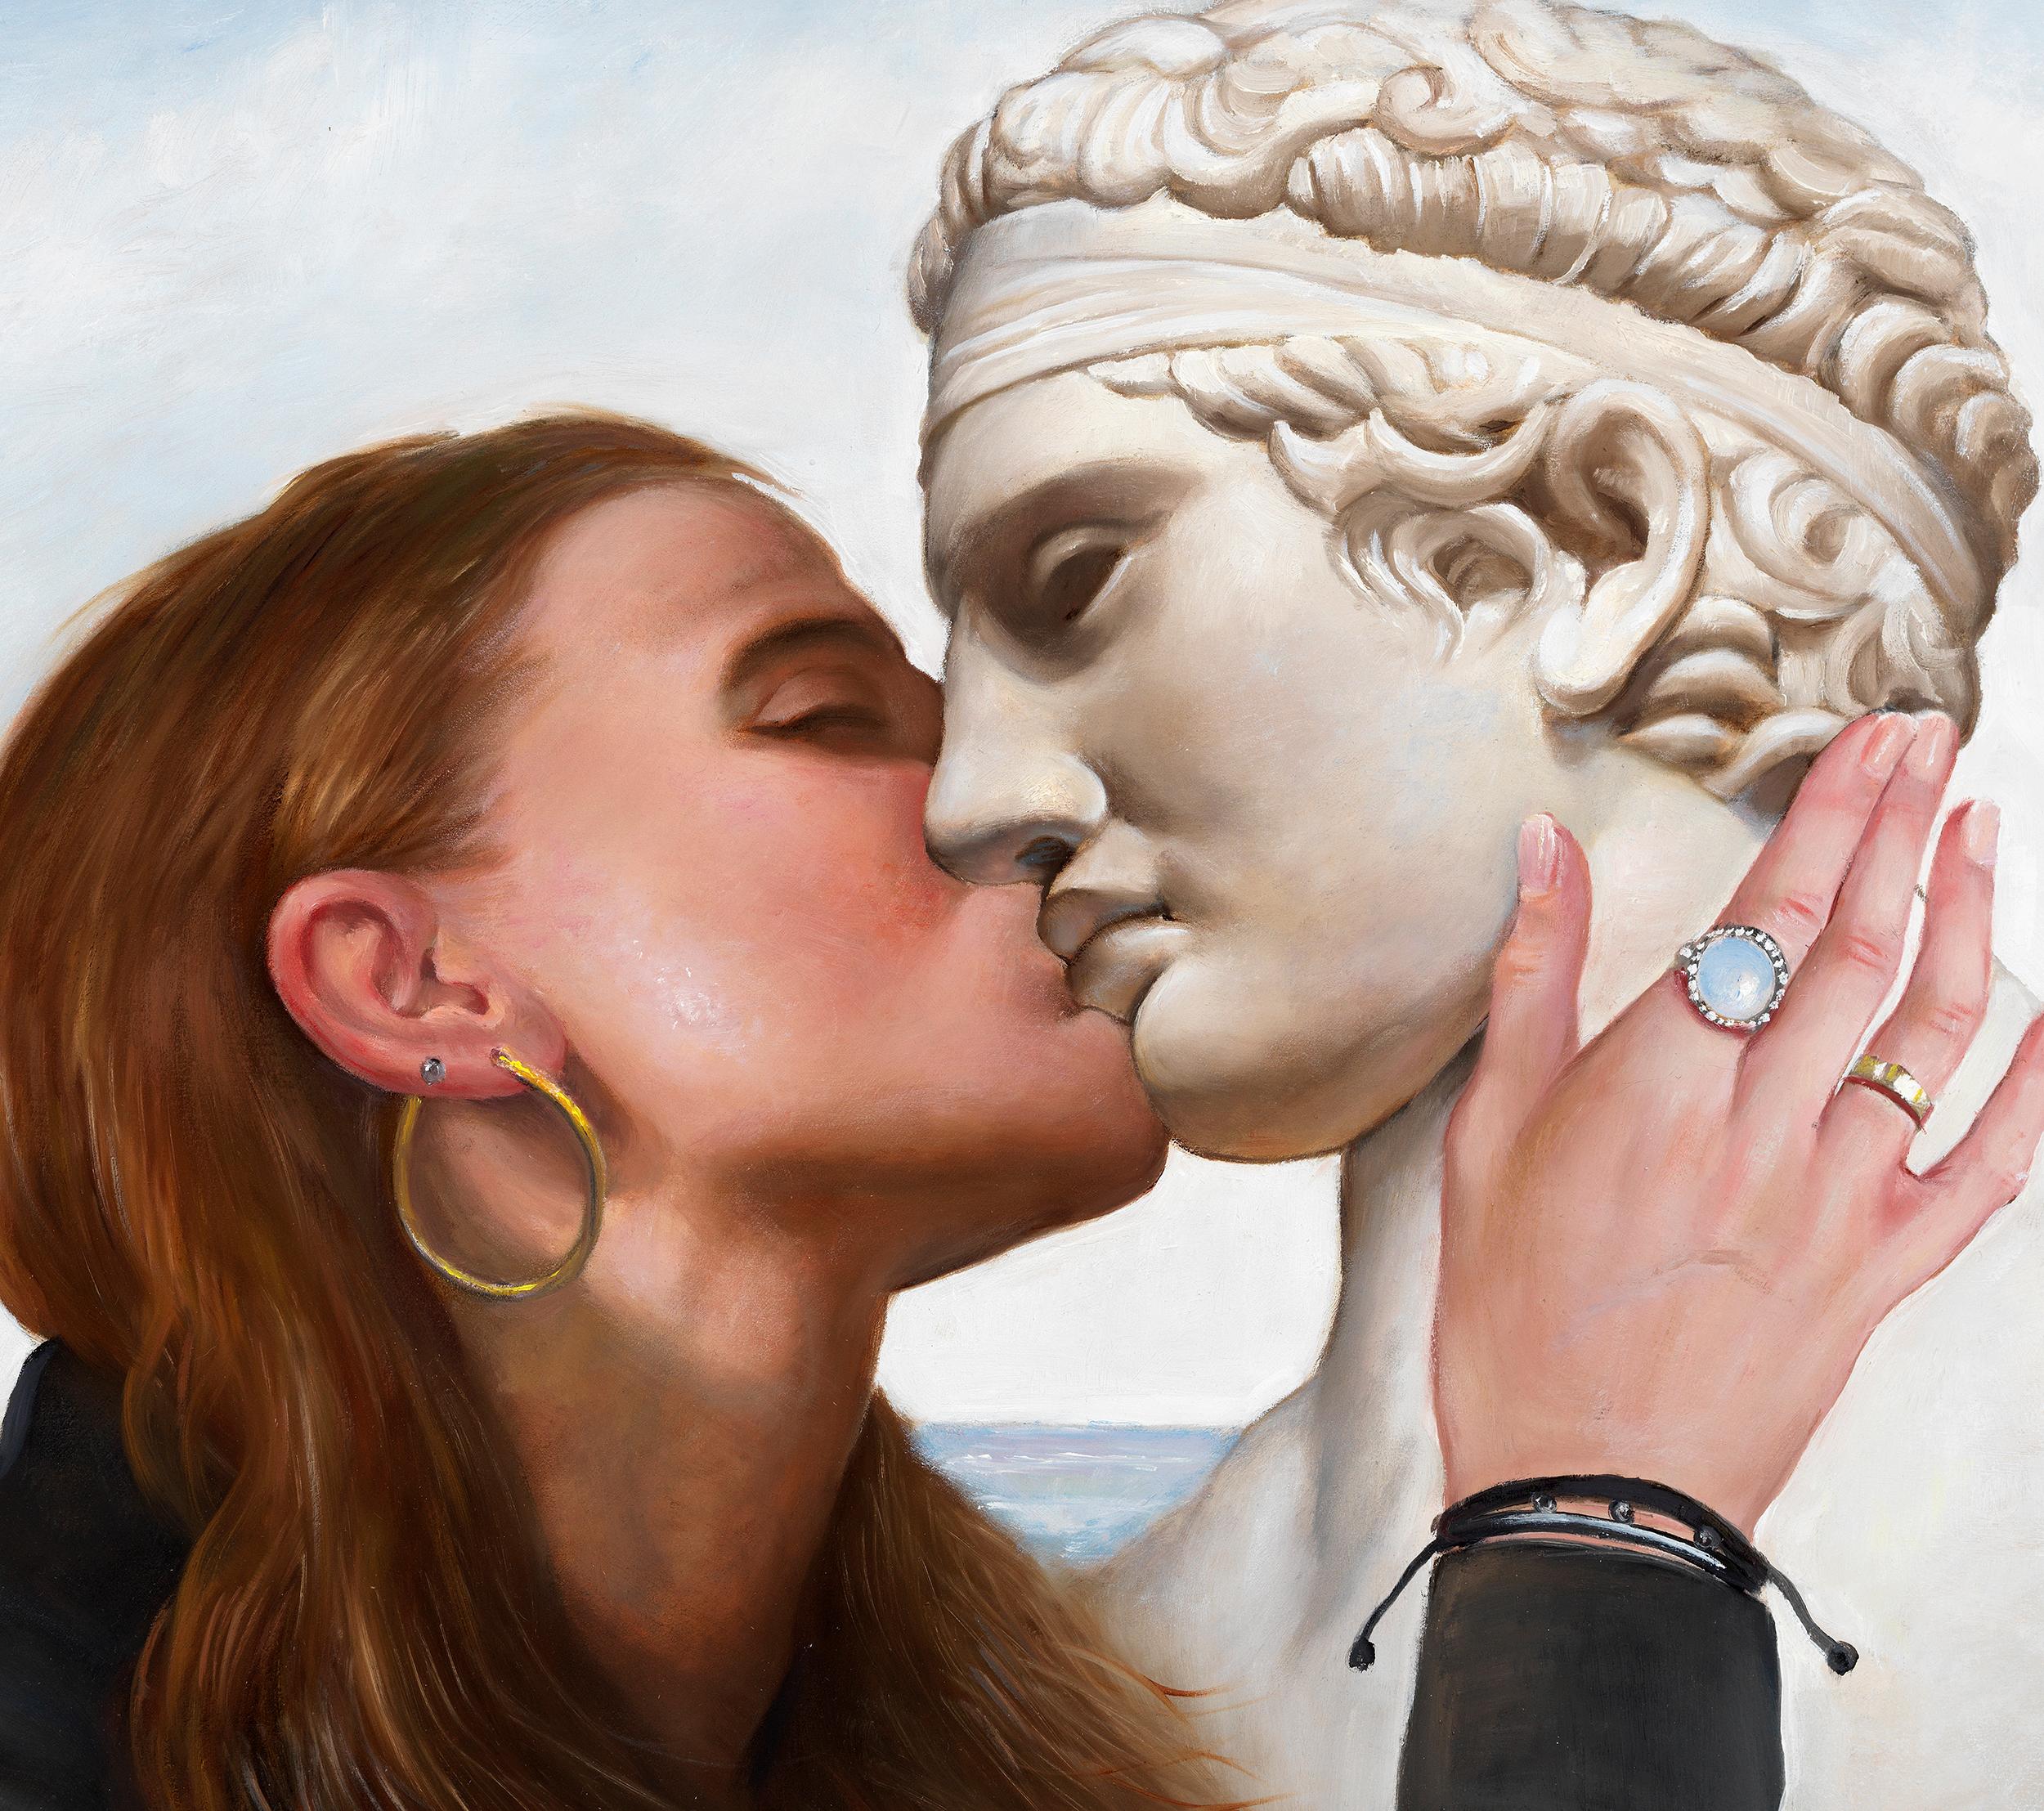 Beauty's Kiss - Woman Kissing a Statue of a Greek Warrior, Original Oil Painting For Sale 3